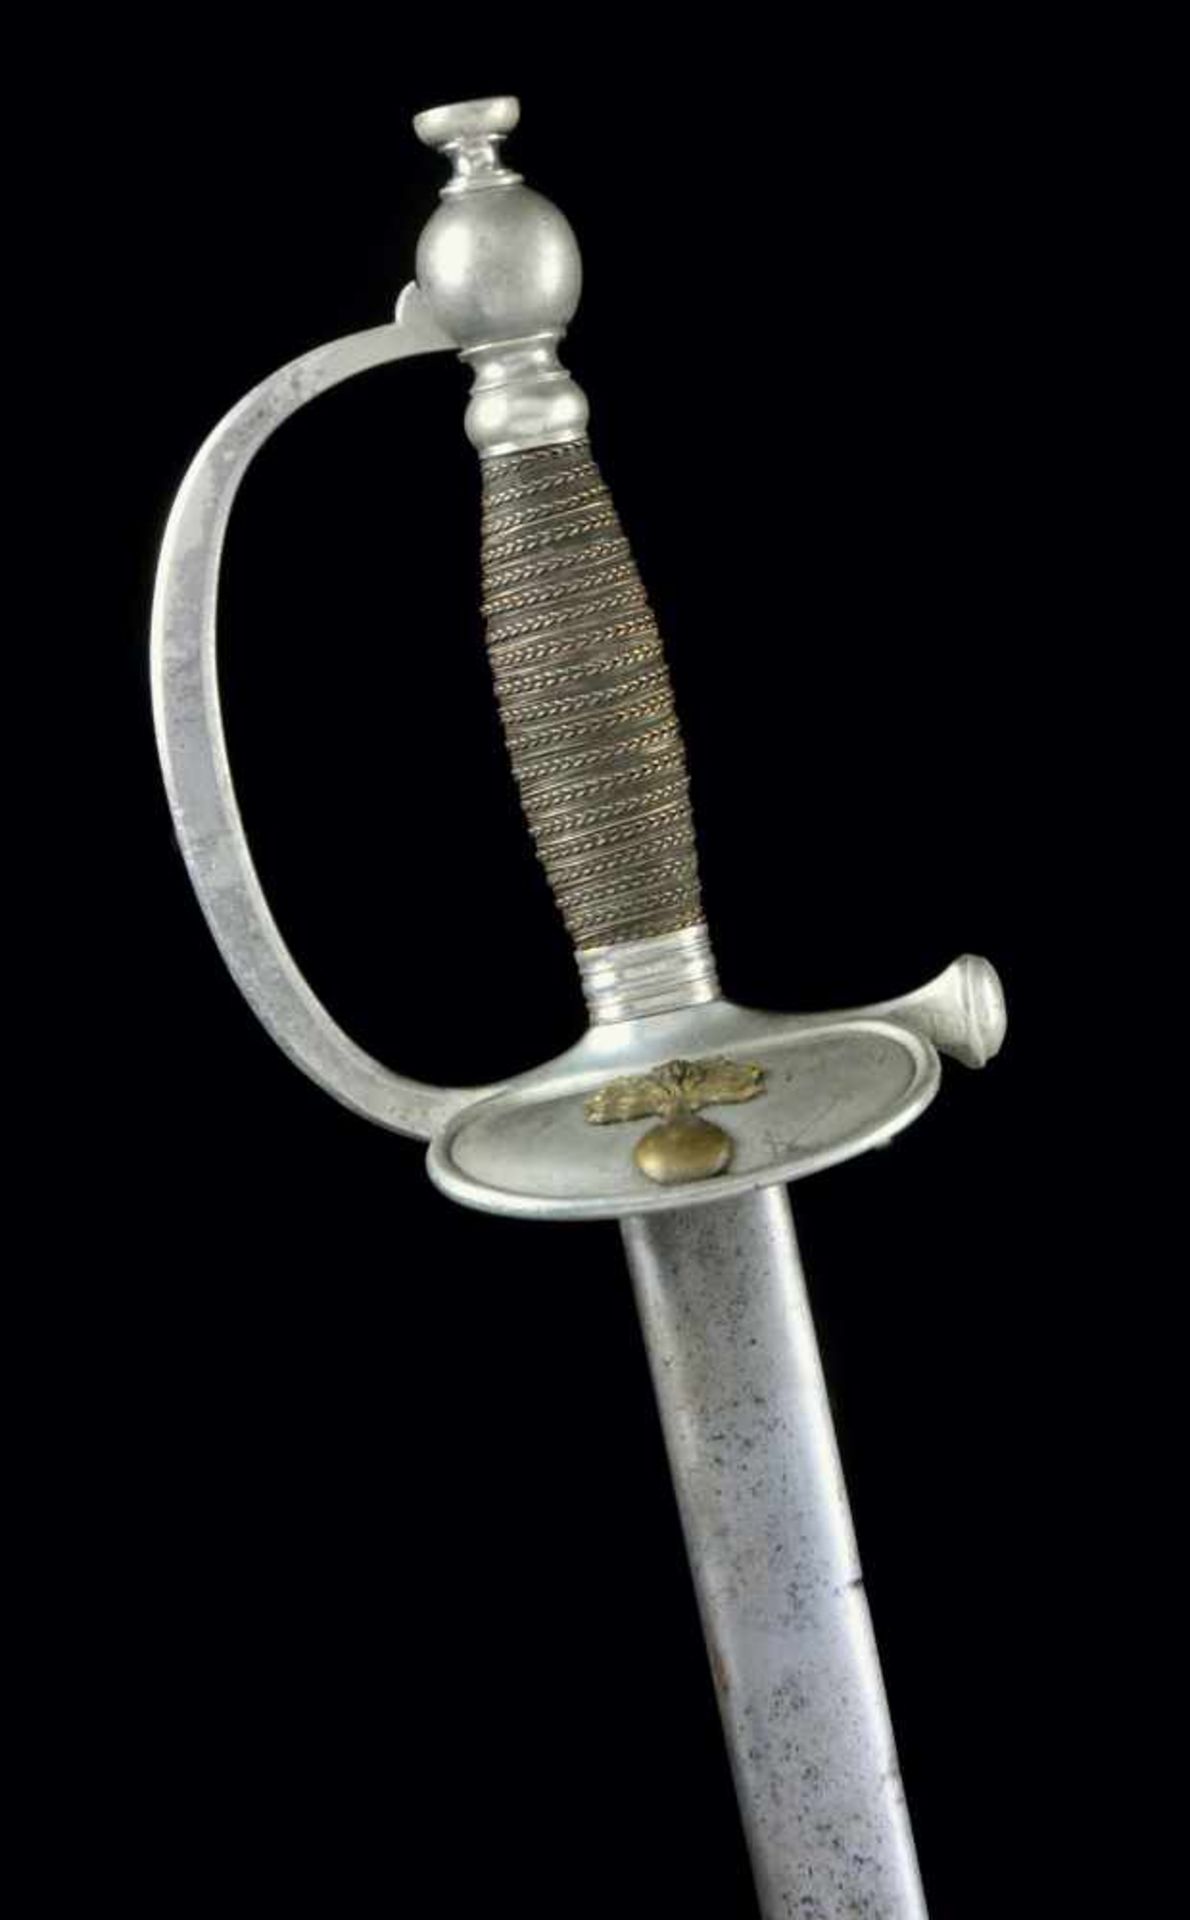 A FRENCH M1887 ARTILLERY OR GRENADIERS N.C.O.’S SHORT SWORD IN SCABBARD, WITH FOLDING GUARD. Origin: